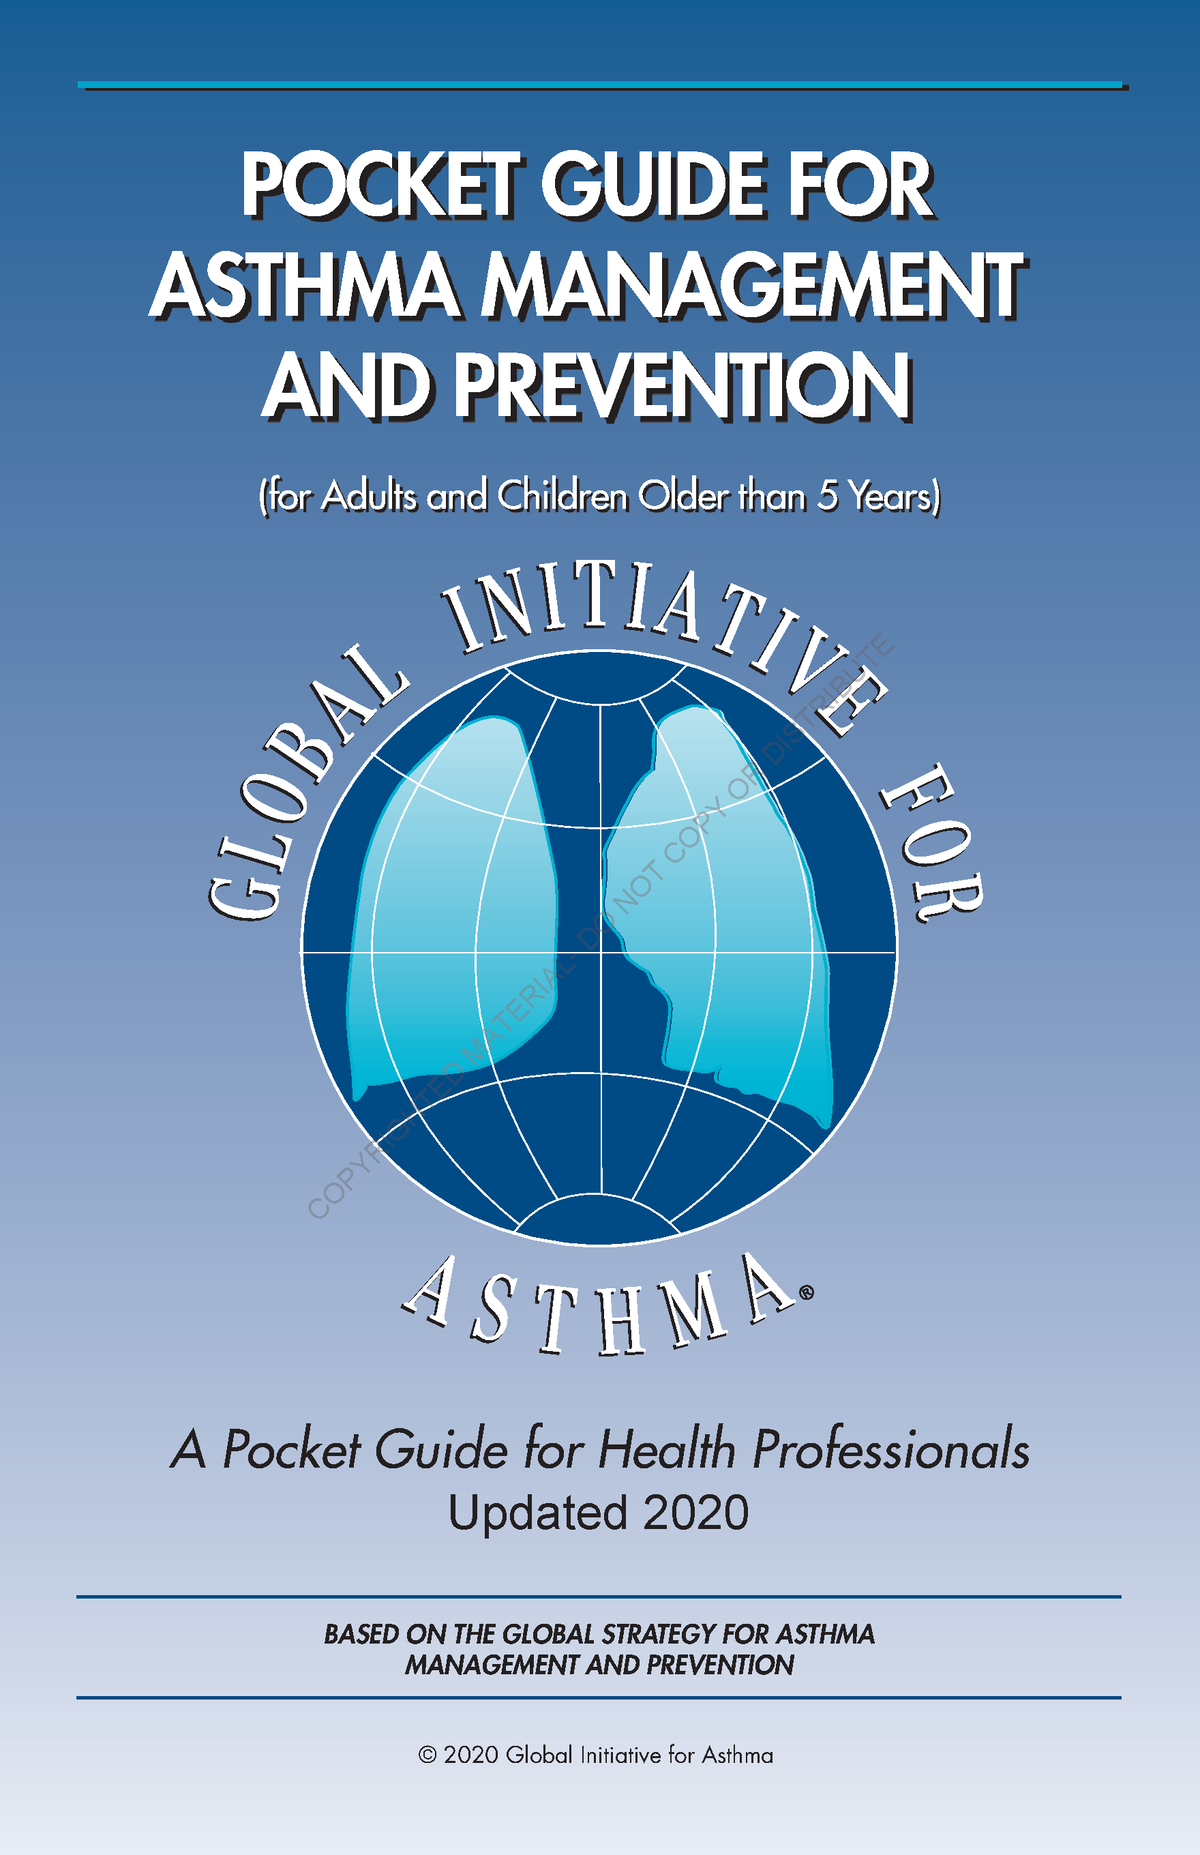 GINA Guideline for asthma POCKET GUIDE FOR ASTHMA MANAGEMENT AND